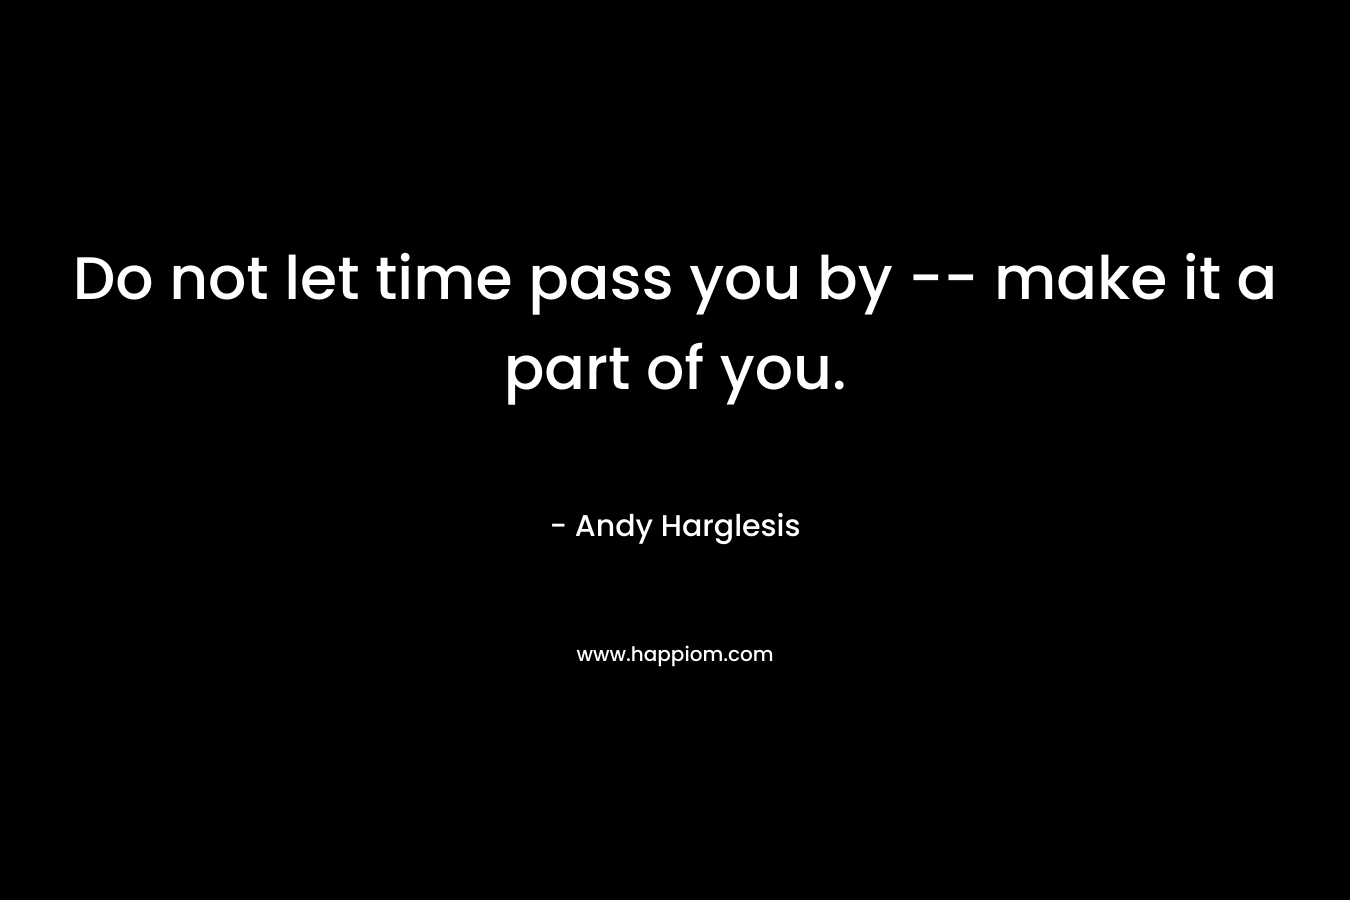 Do not let time pass you by -- make it a part of you.